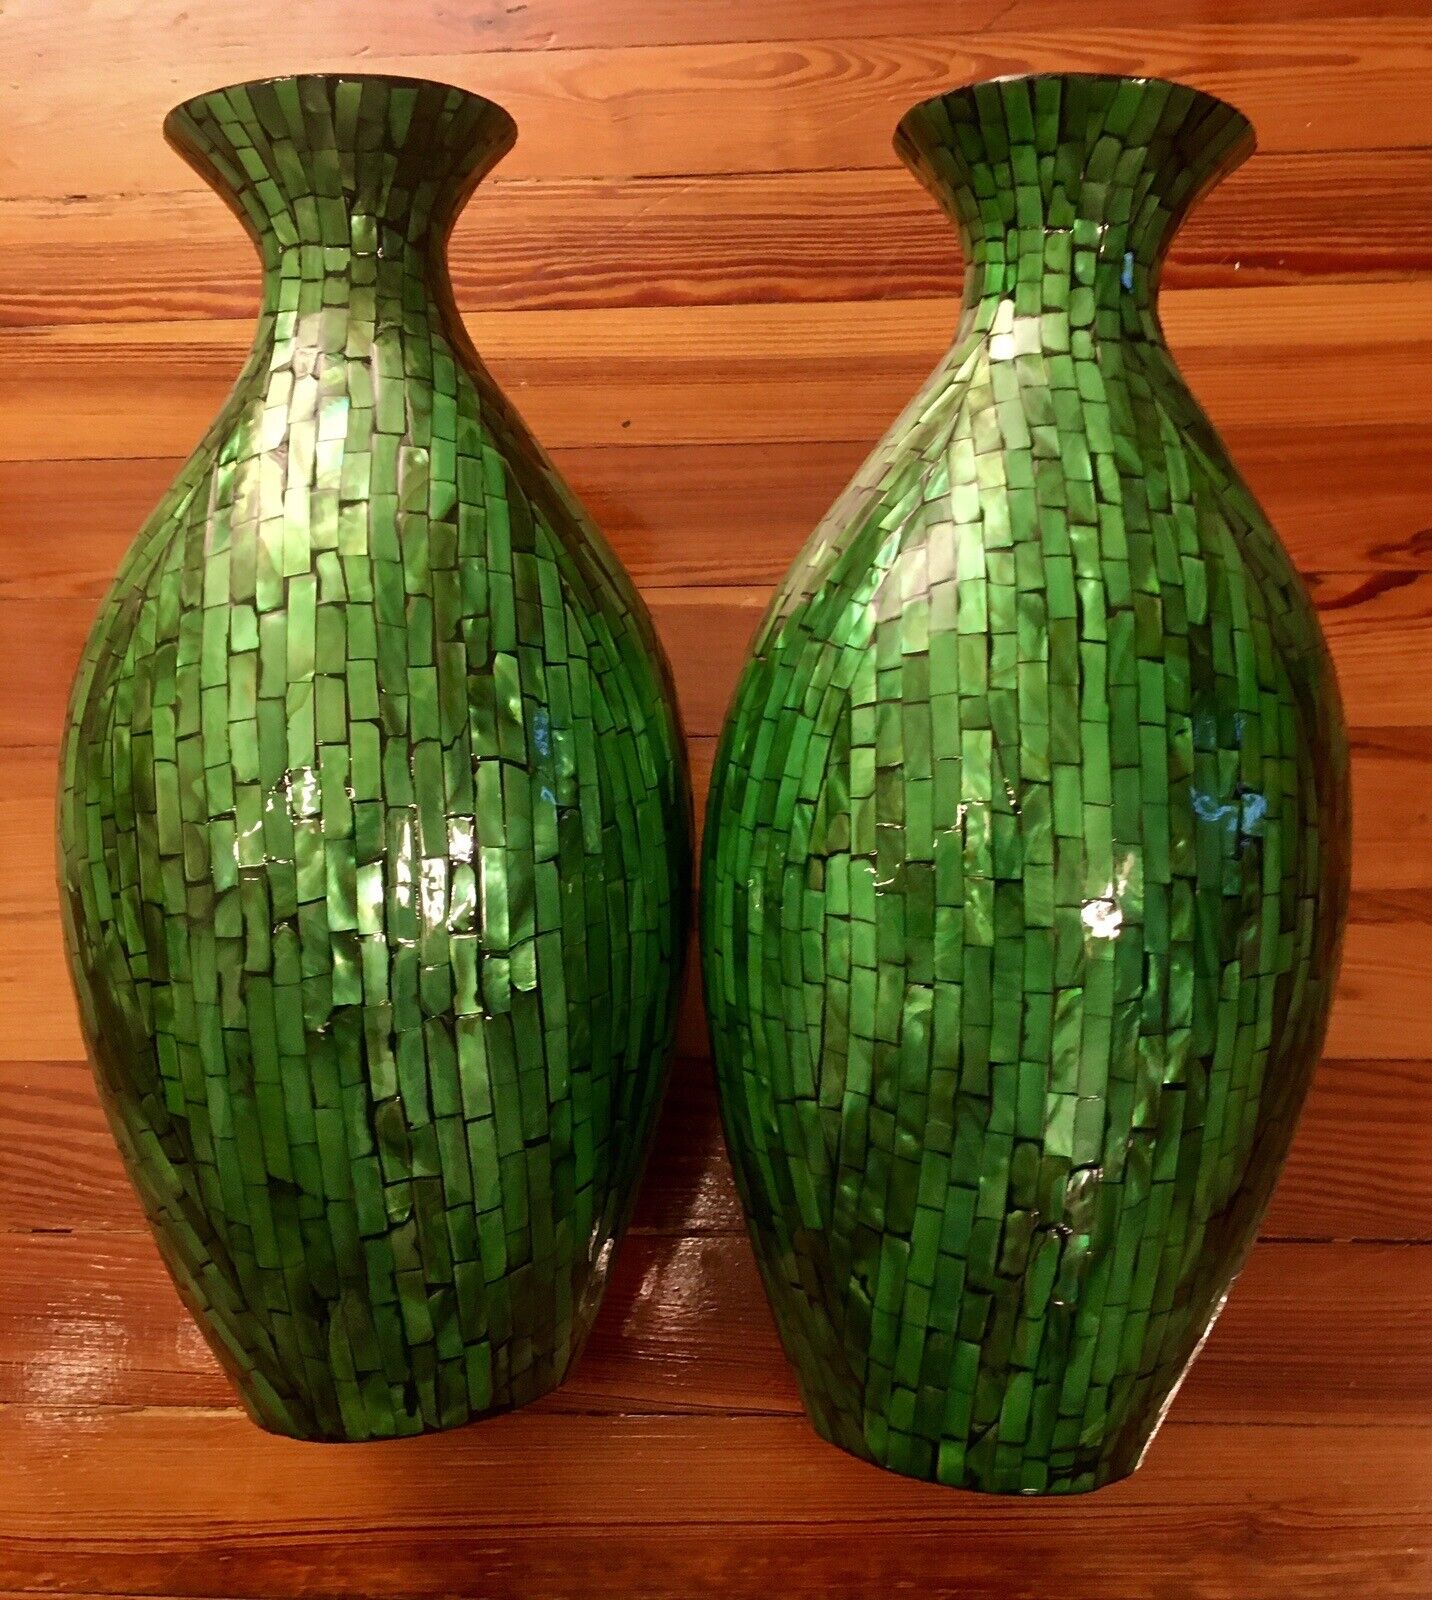 Mother of Pearl Handmade 18” Tall 2 Incandescent Green Mosaic Vases